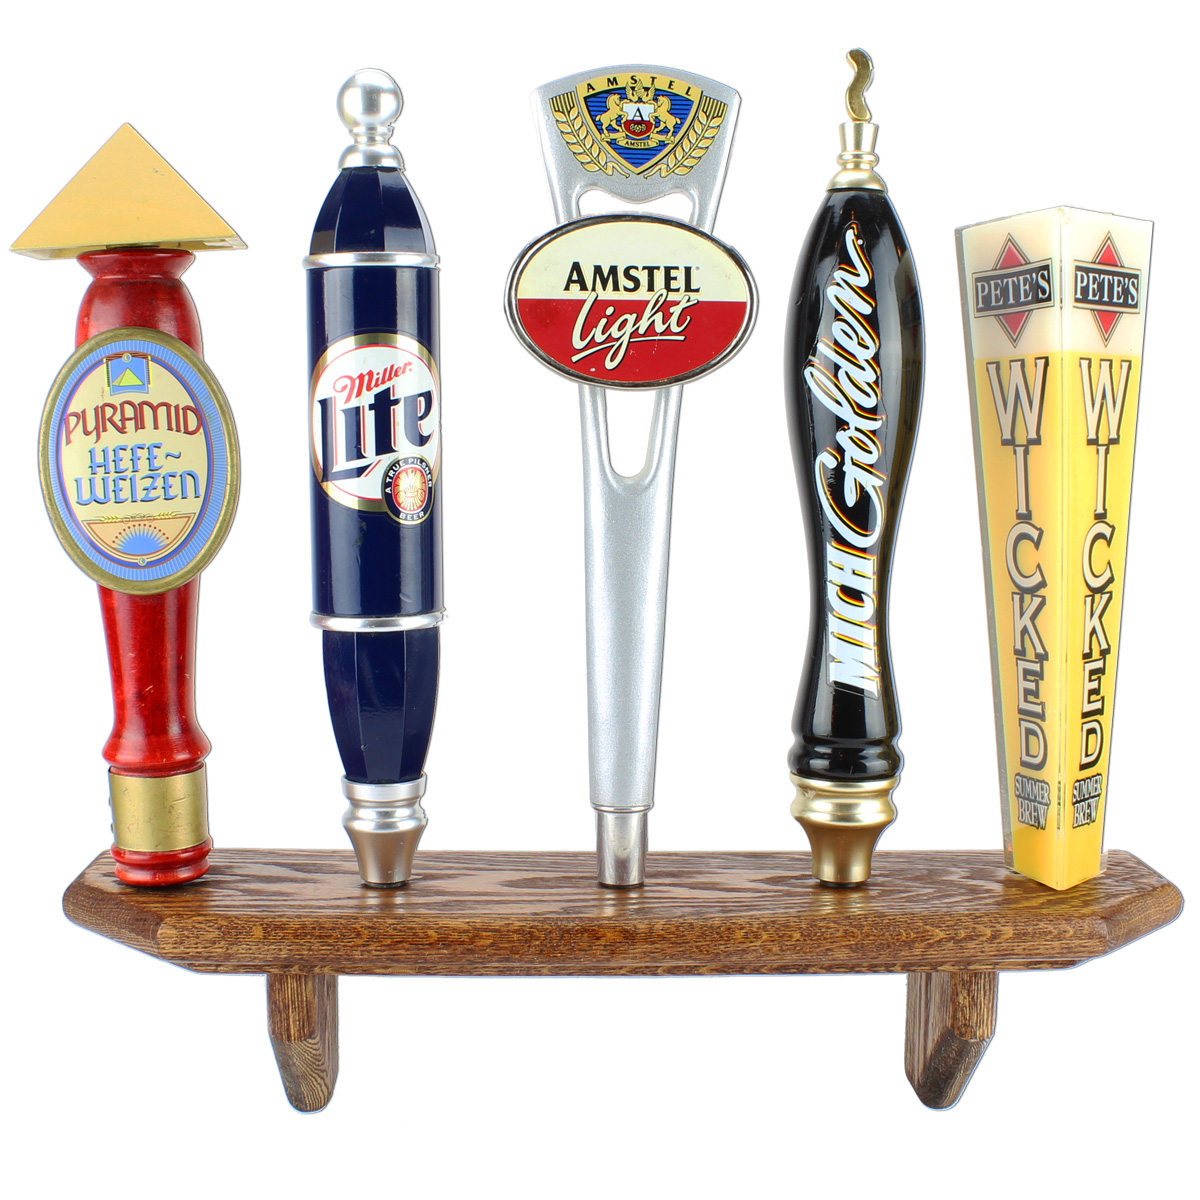 WALL MOUNTED 5 PLACE BEER TAP HANDLE DISPLAY SHELF SOLID OAK INCLUDES BRACKETS 